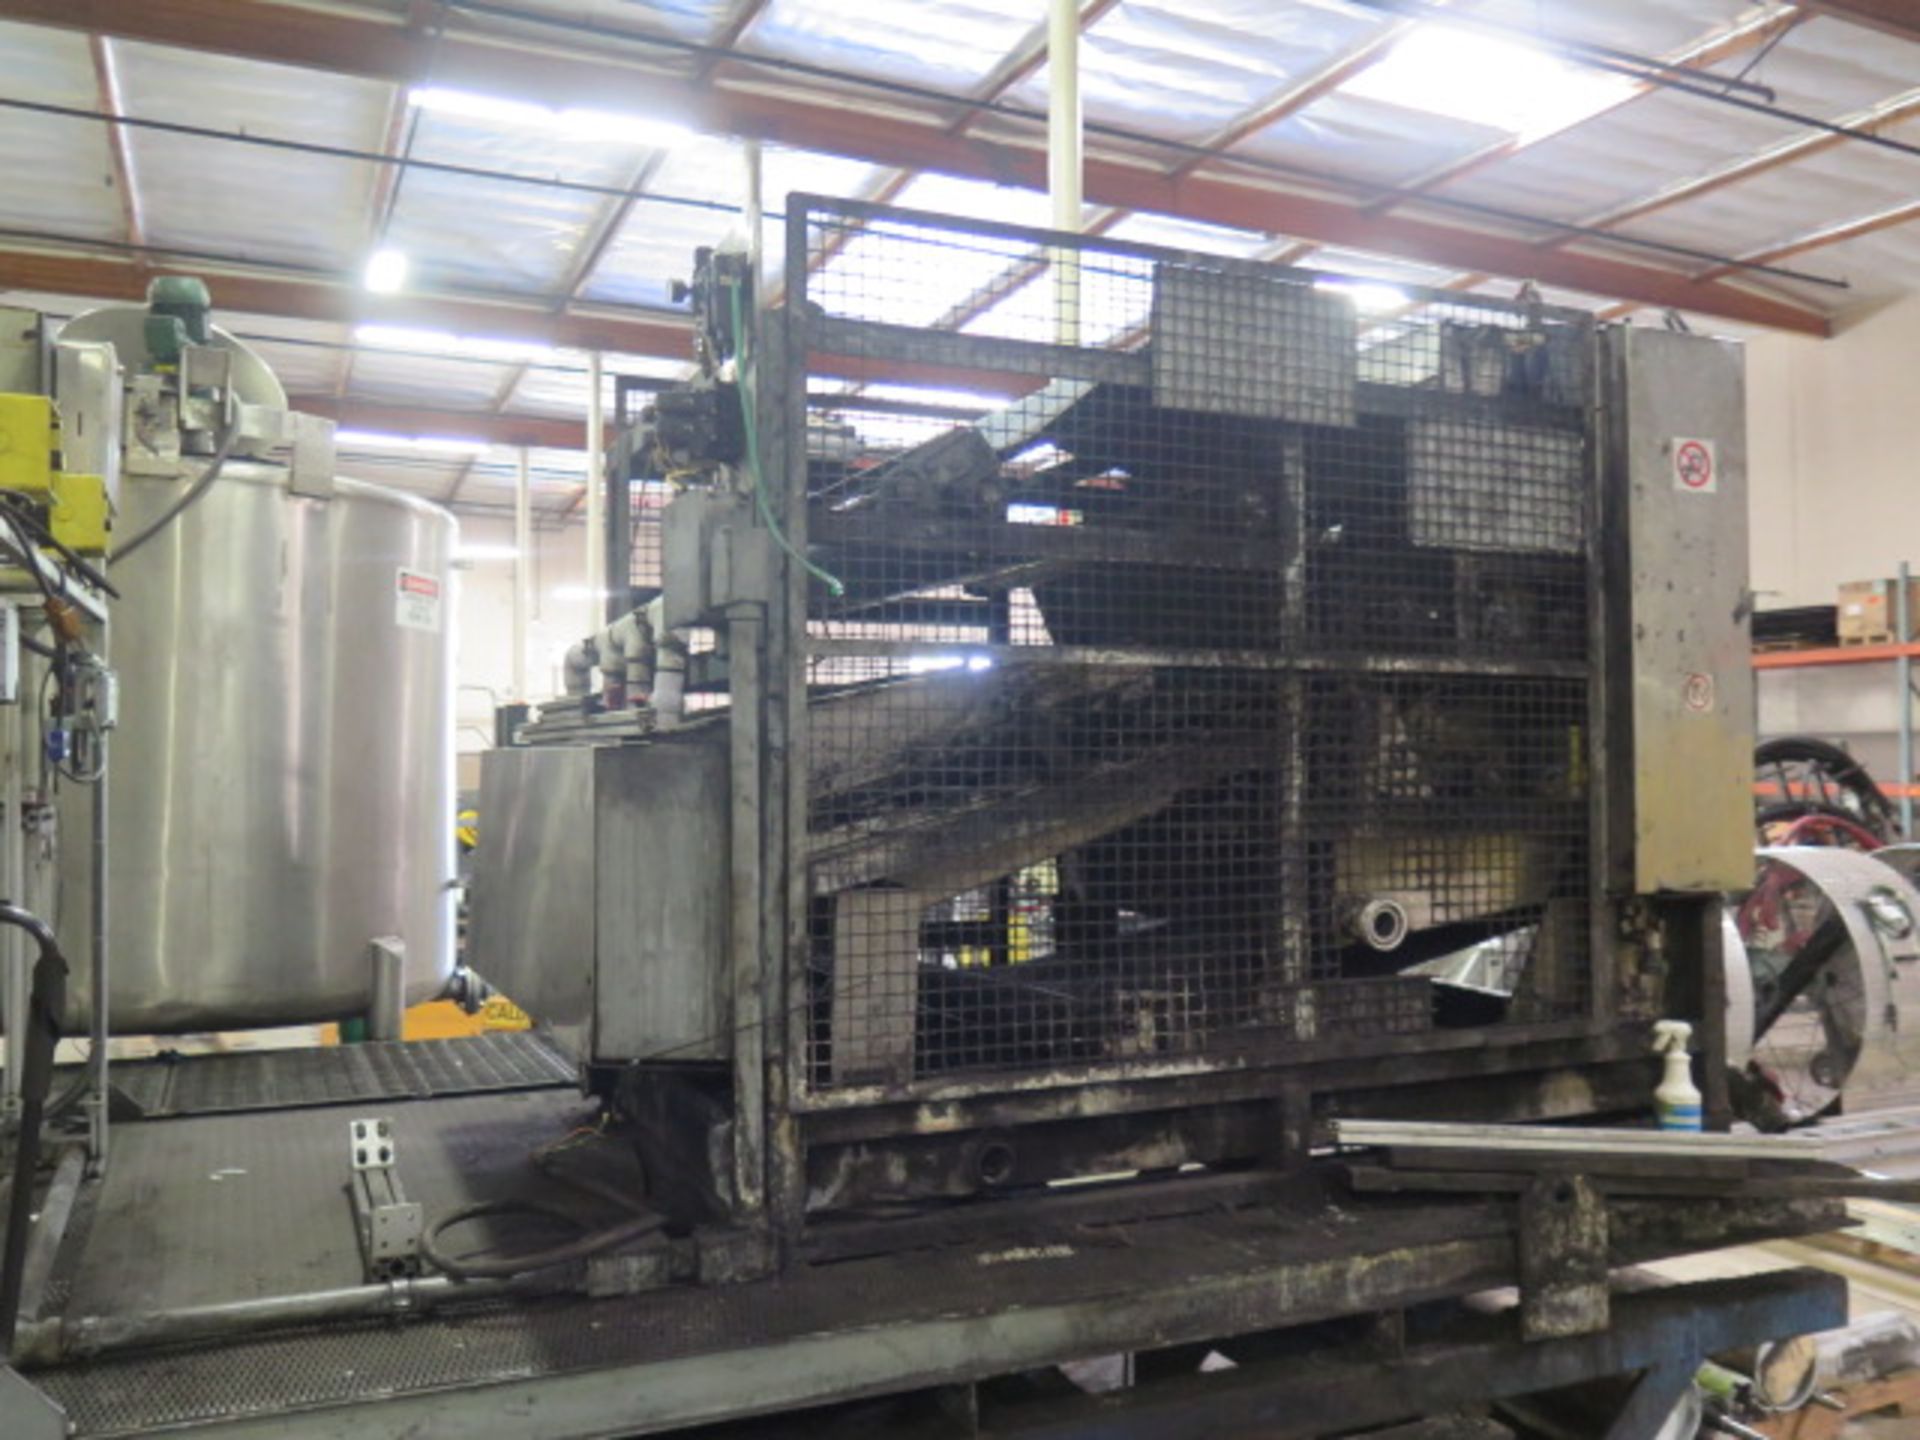 Wet Biochar Line Consisting of : 4000 Lb Cap Bag Loading System SOLD AS IS WITH NO WARRANTY - Image 12 of 16